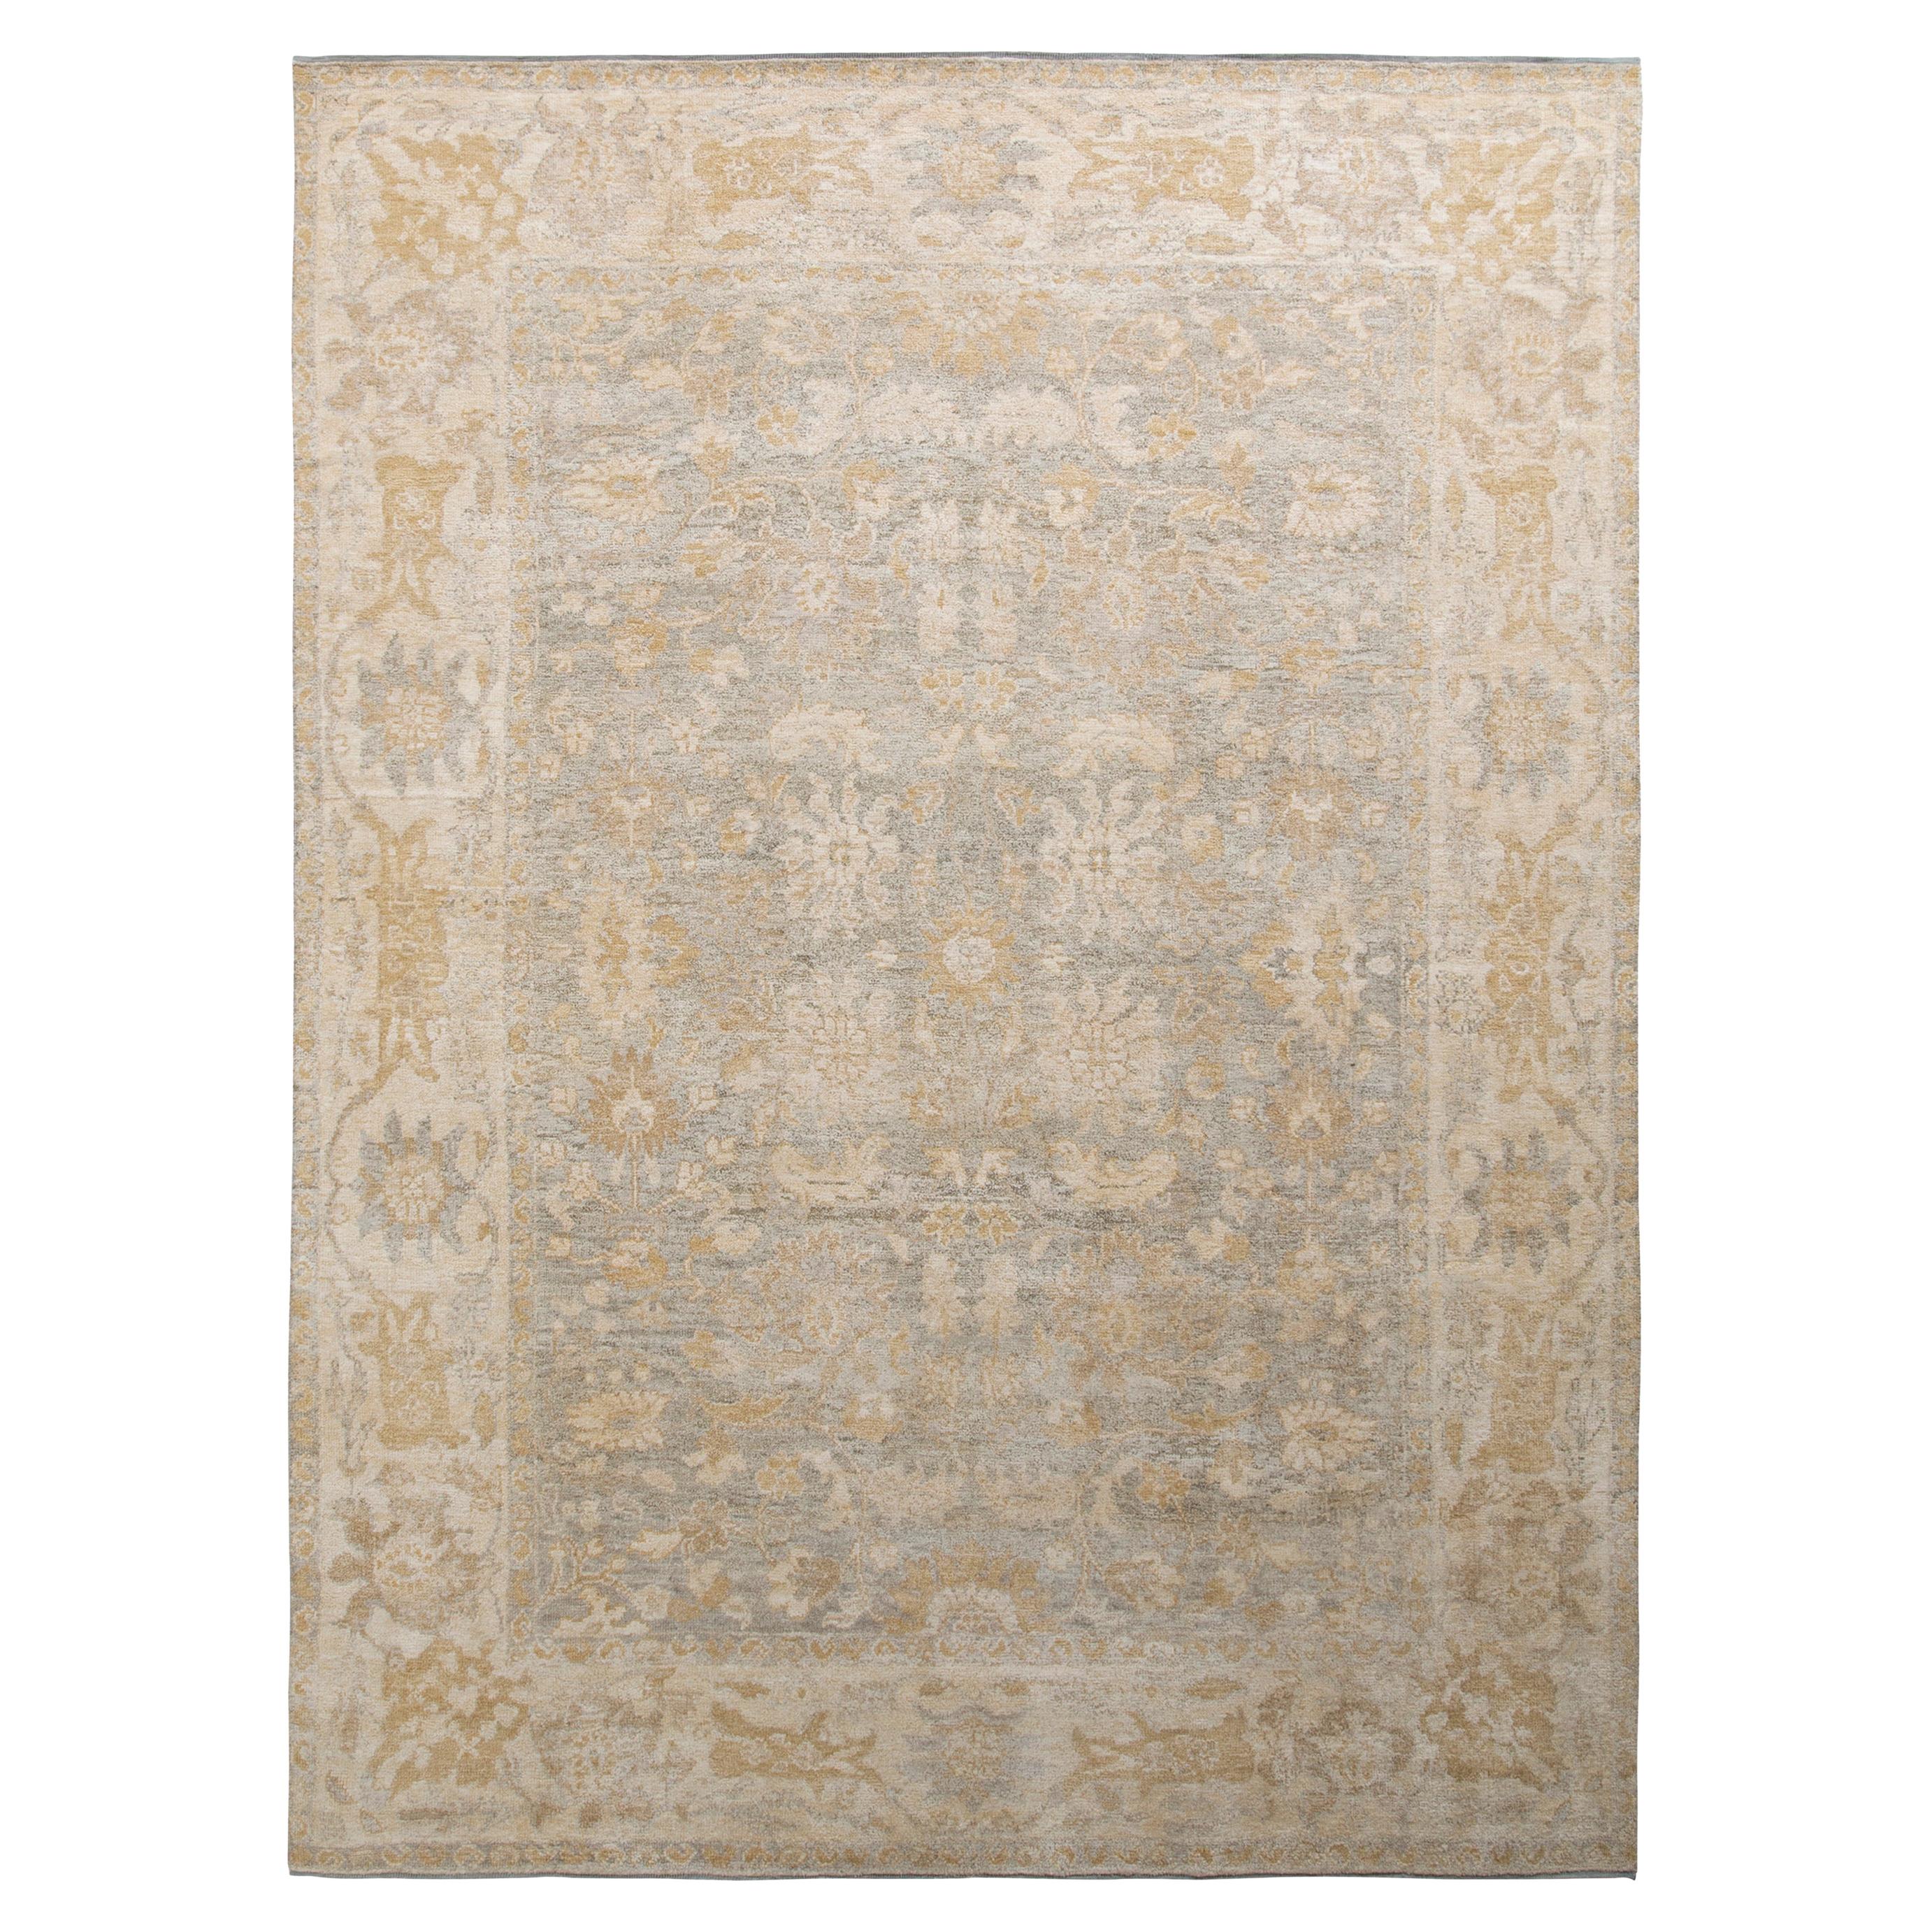 Rug & Kilim’s Transitional Style Rug in Beige-Brown All over Floral Pattern For Sale